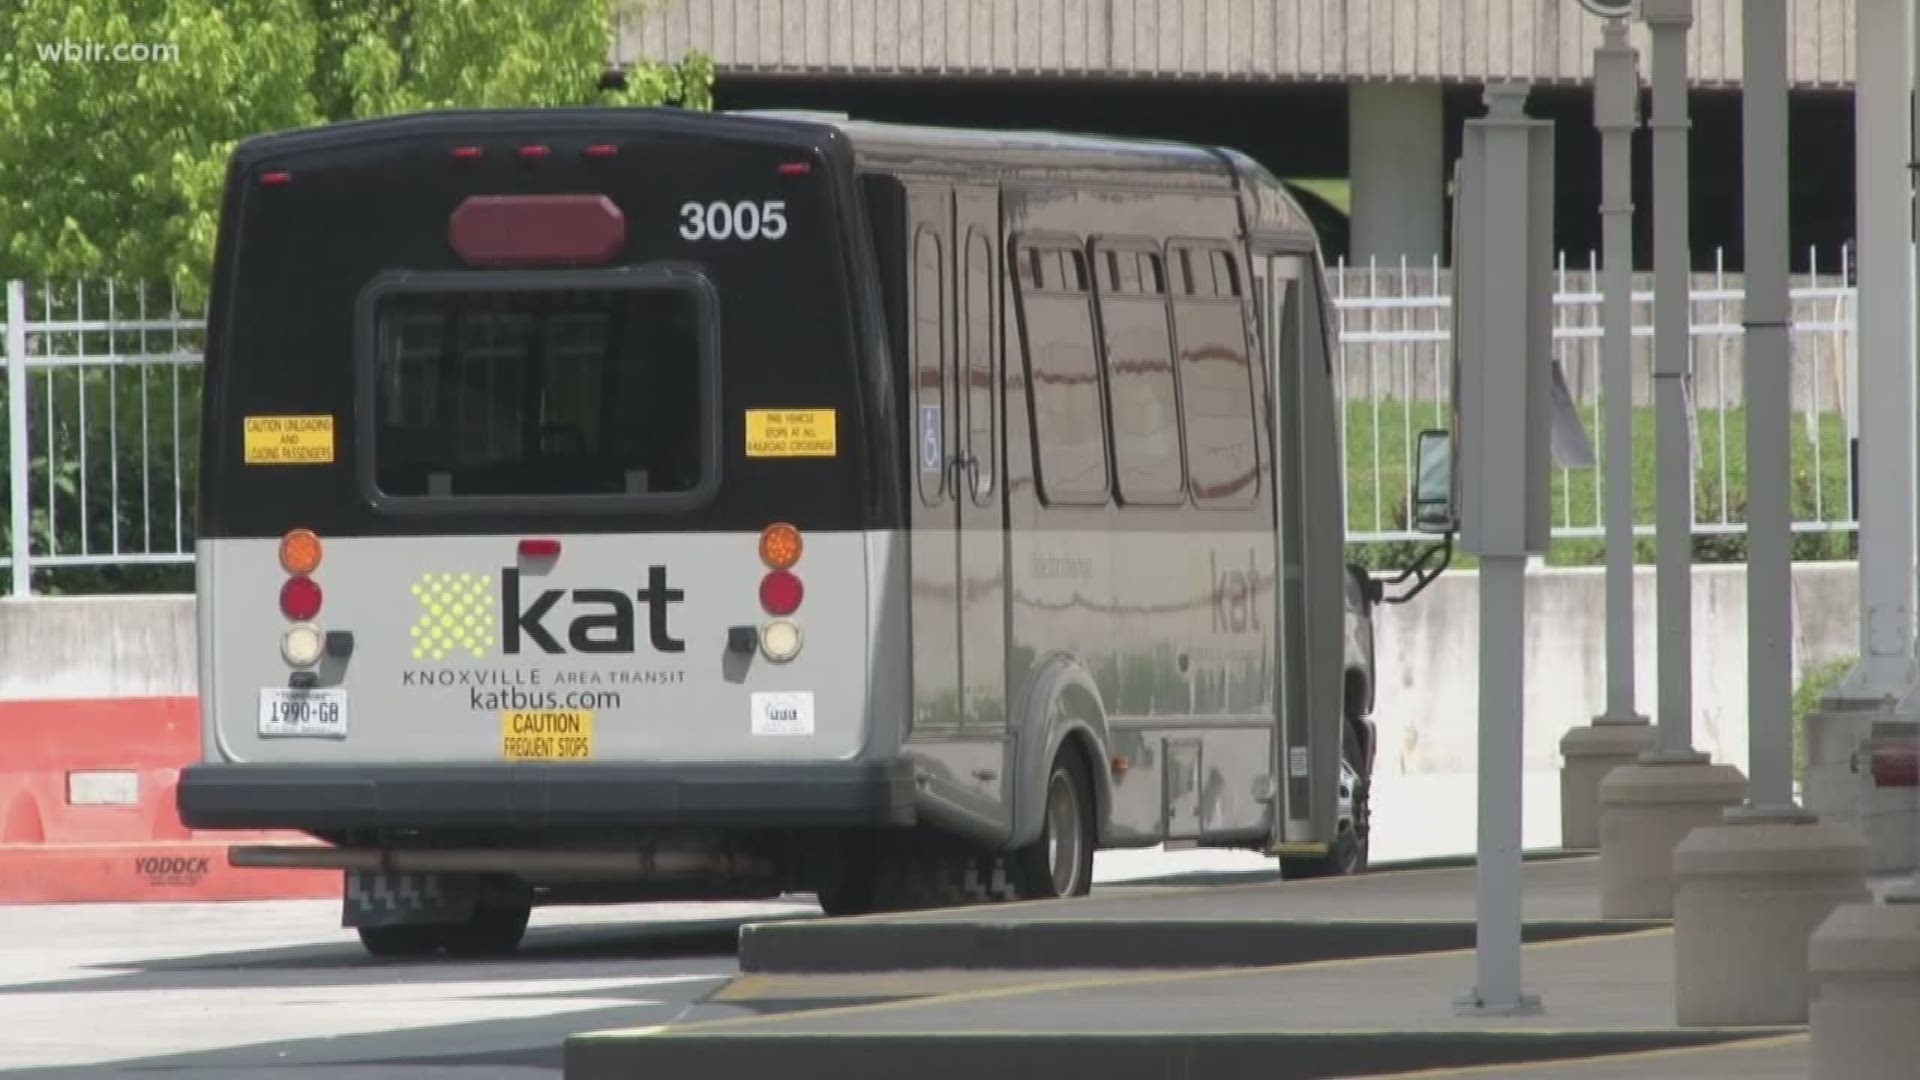 April 19, 2018: Knoxville Area Transit will begin using electric vehicles by the fall of next year.